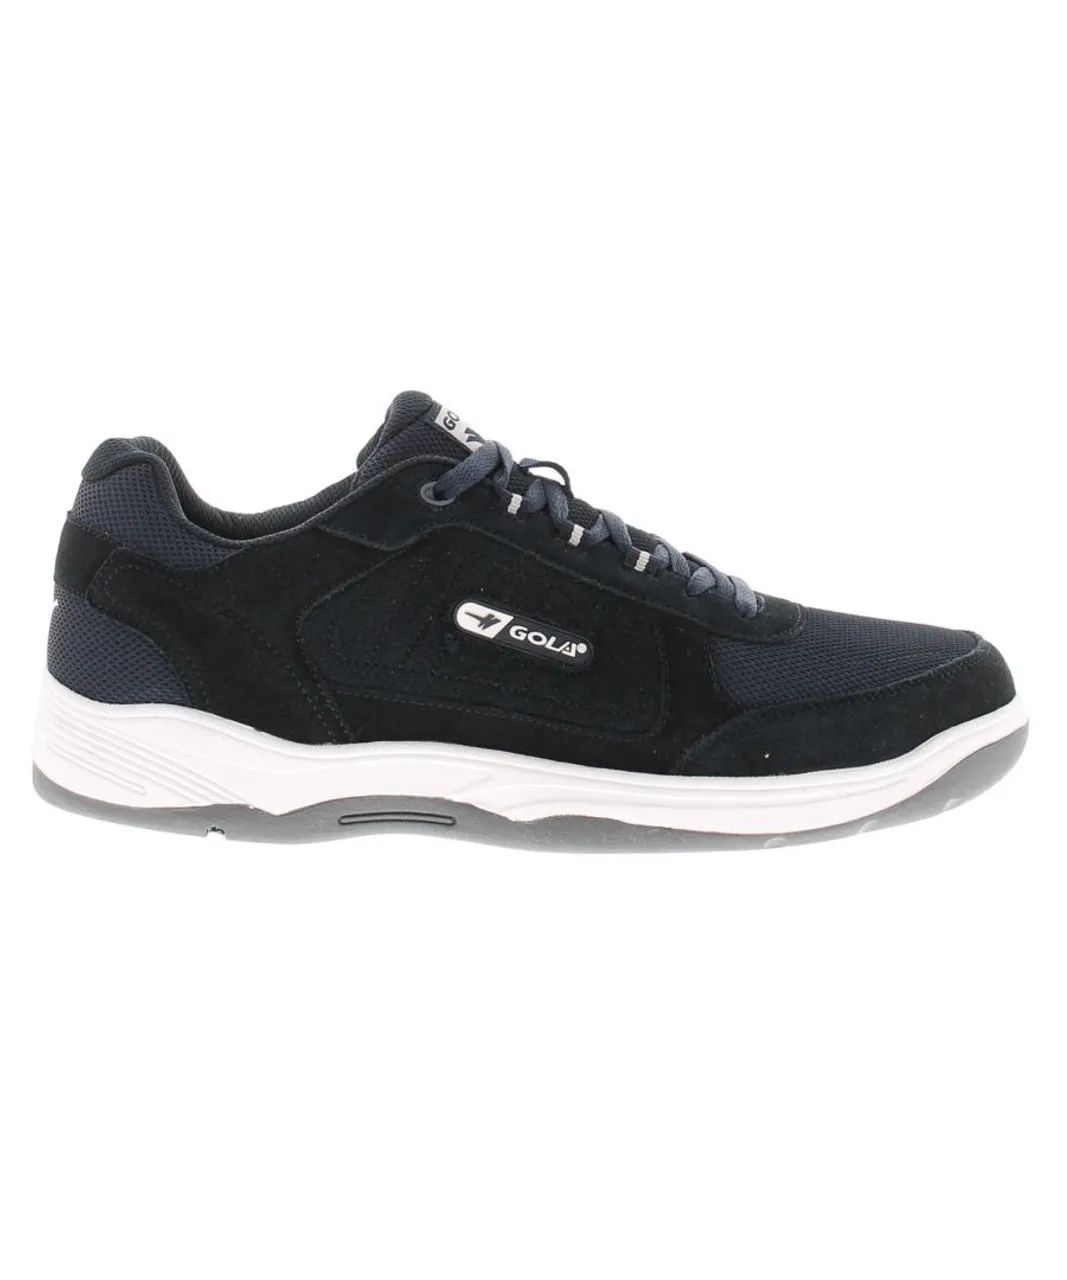 Gola Mens Trainers Belmont Suede Leather Lace Up navy